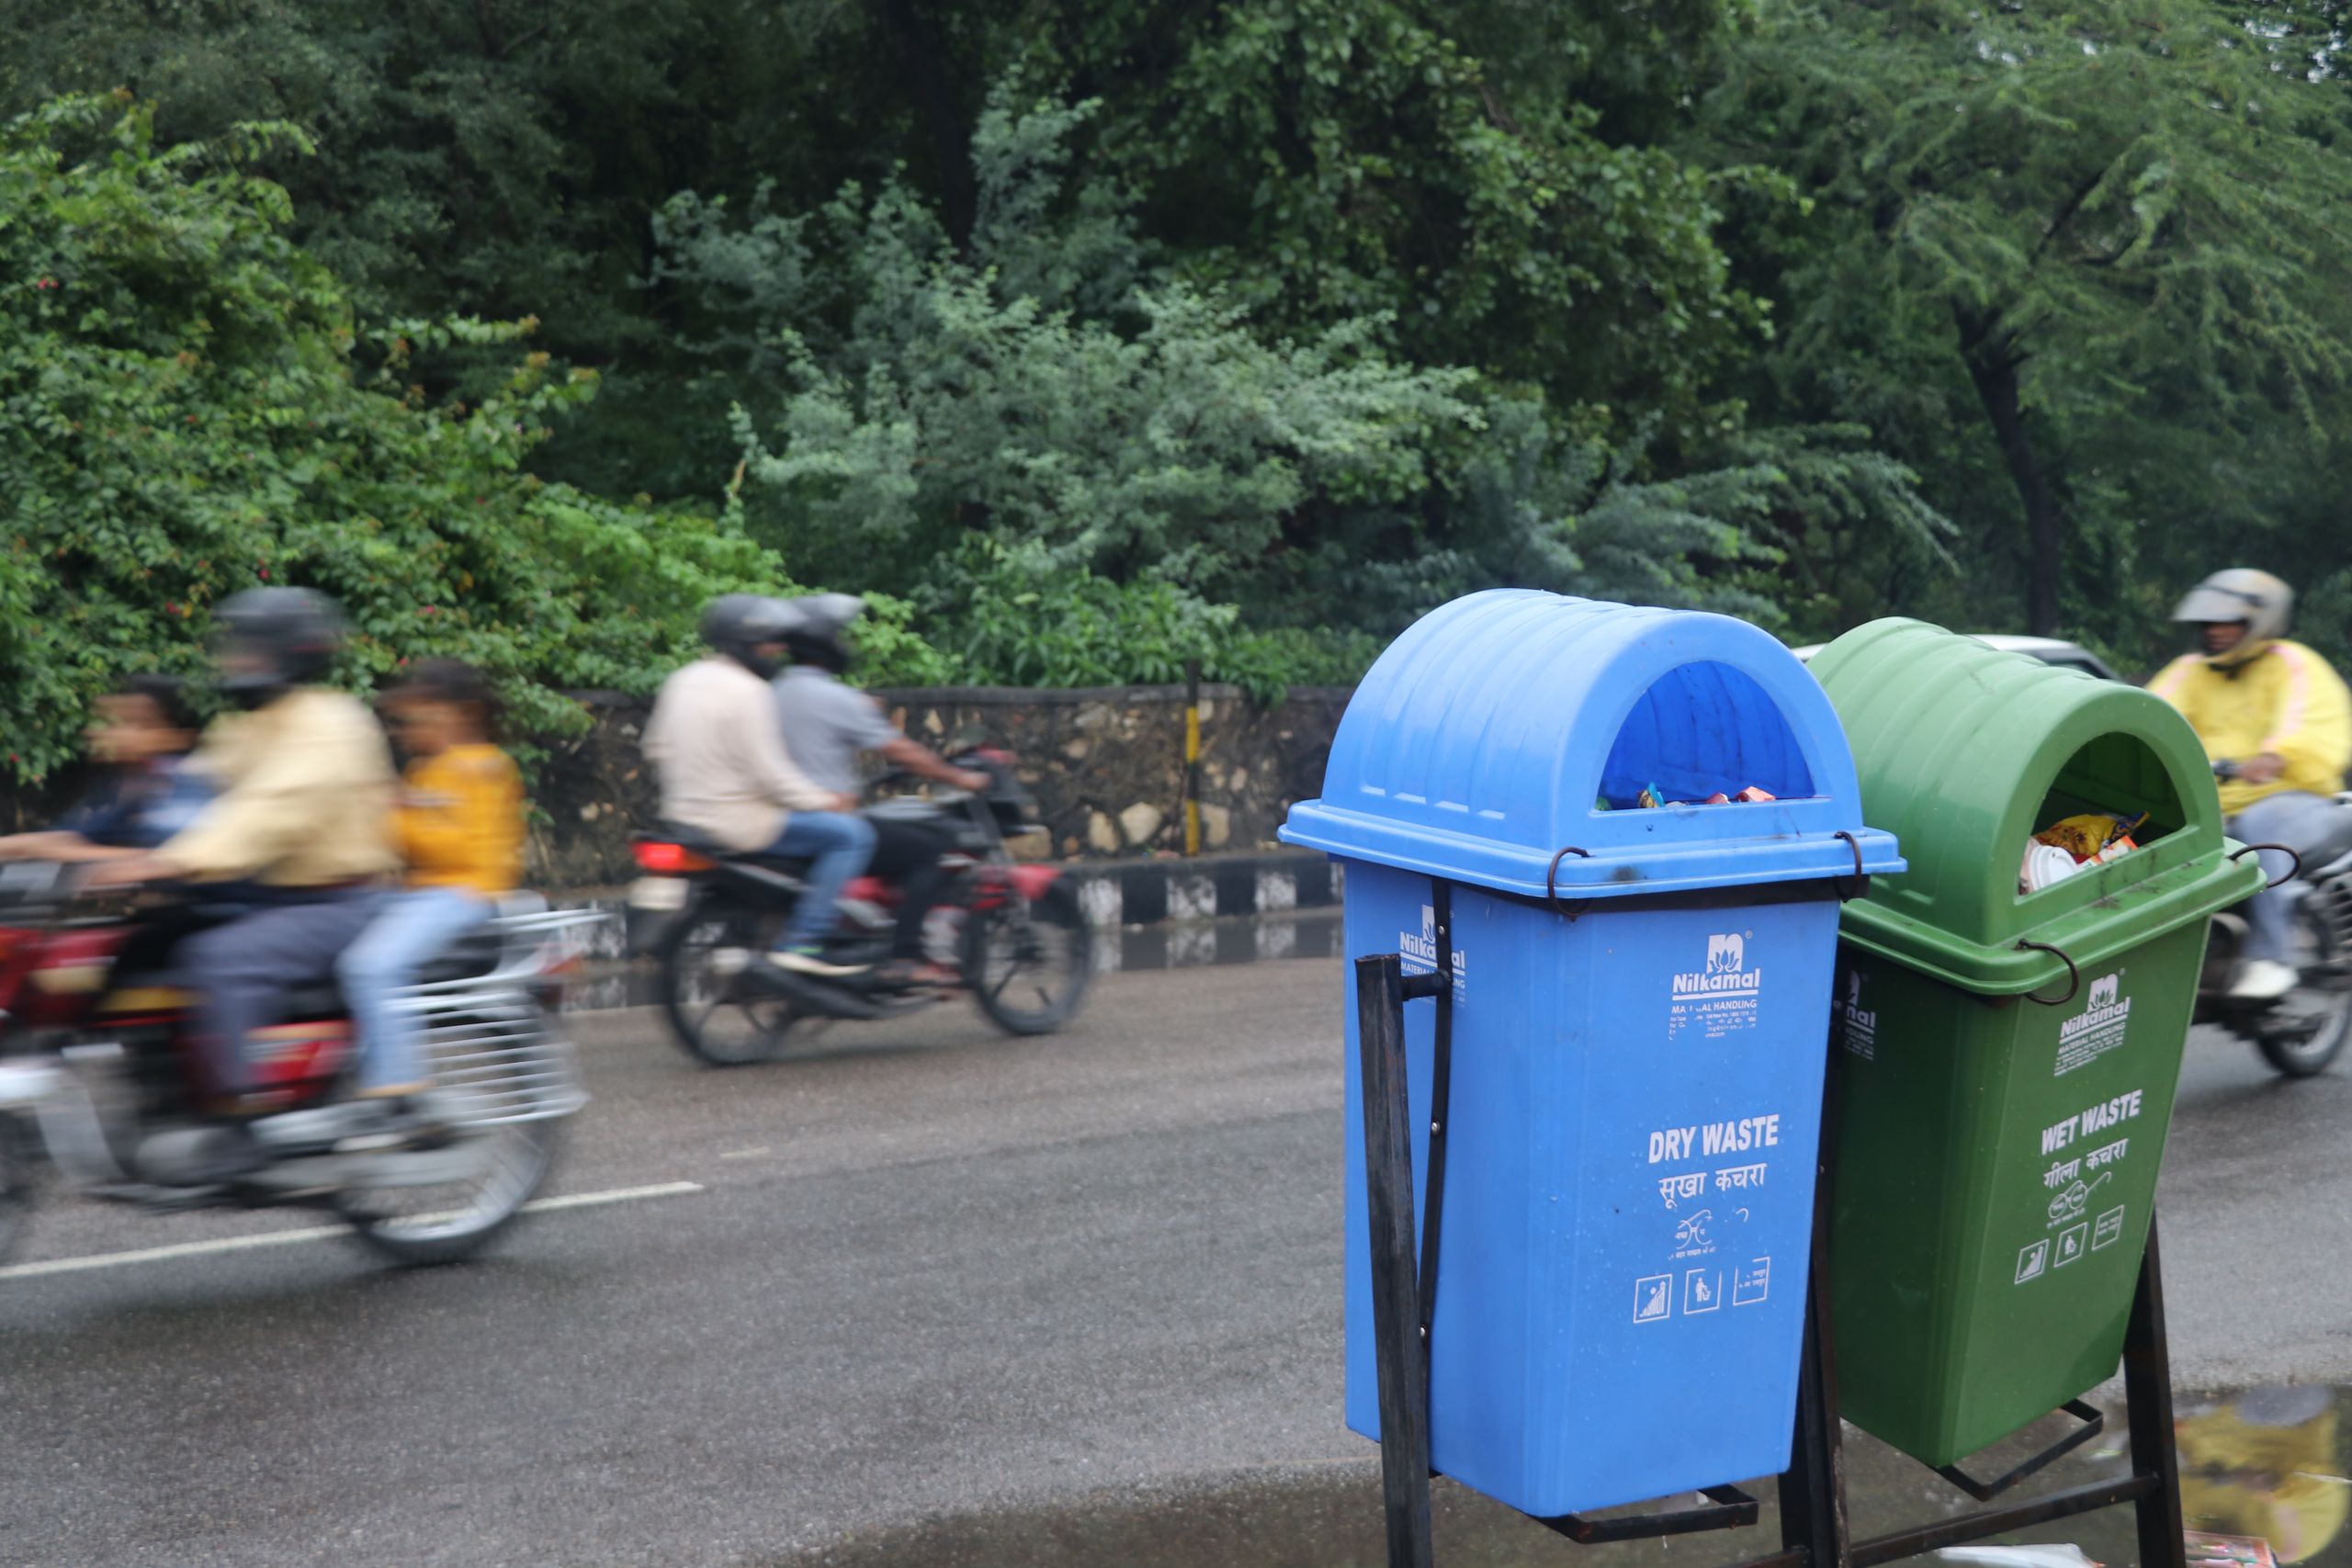 Some of the many new rubbish bins lining the streets of Jaipur